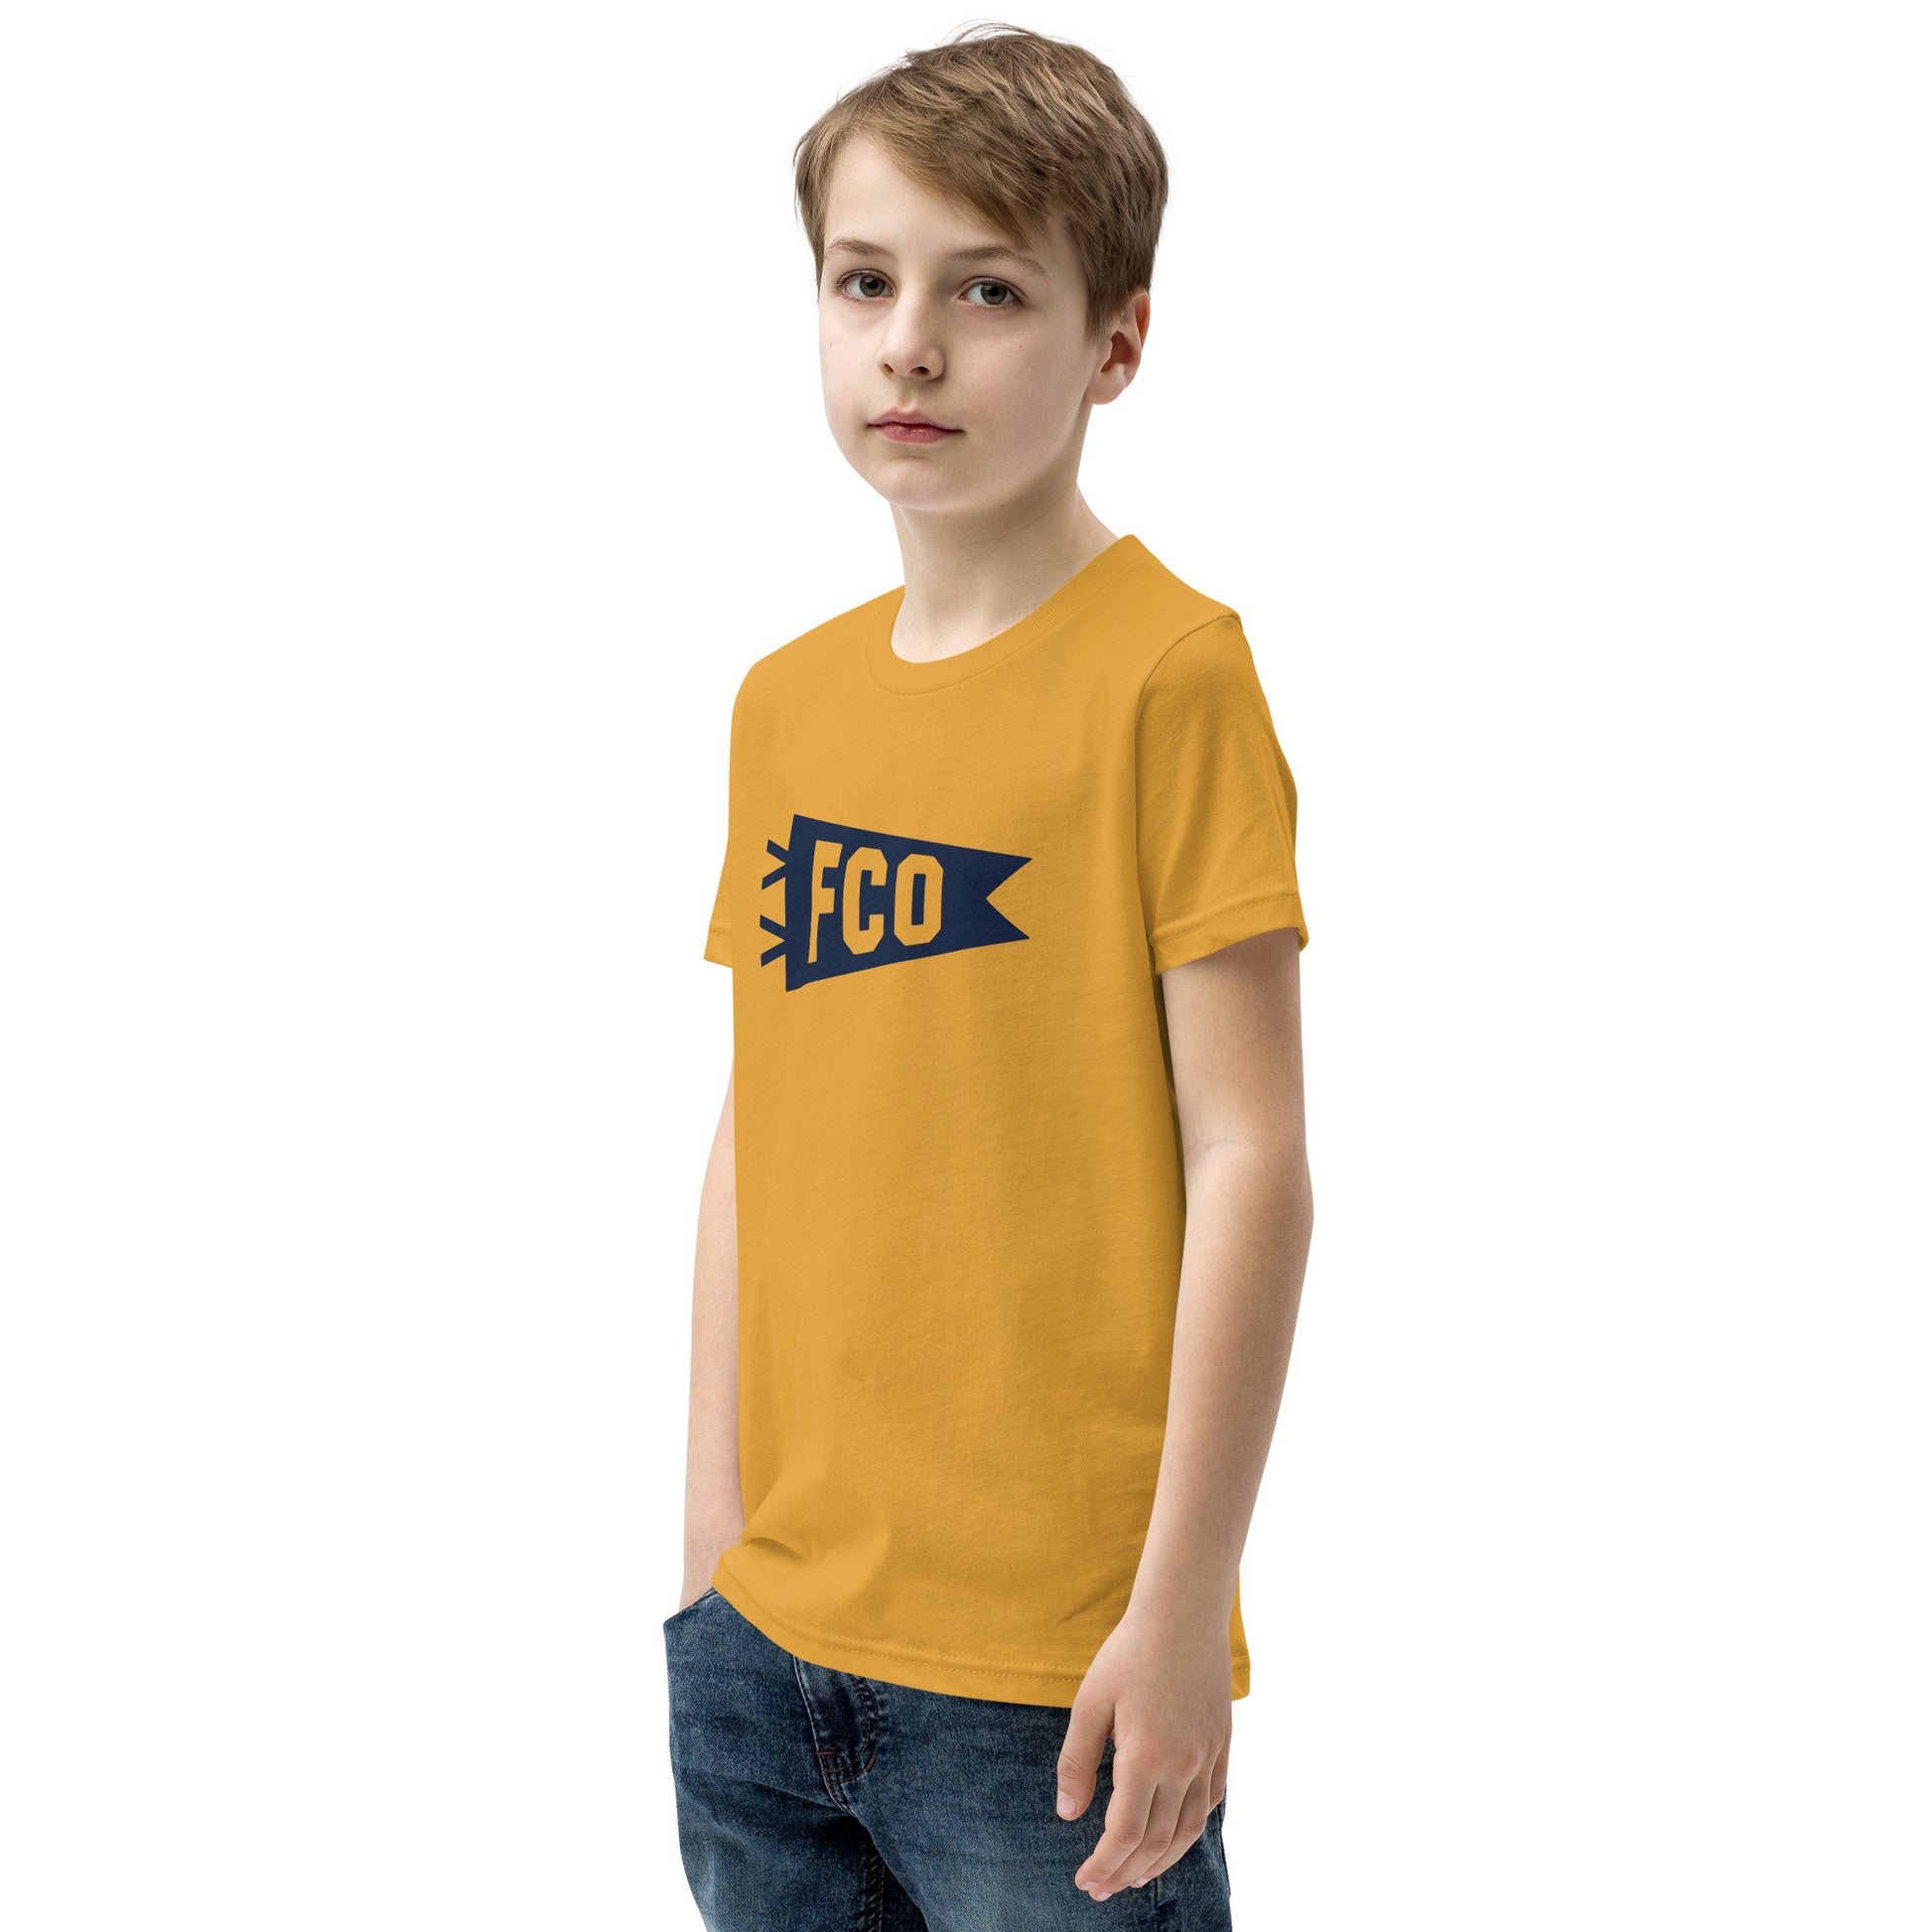 Kid's Airport Code Tee - Navy Blue Graphic • FCO Rome • YHM Designs - Image 06